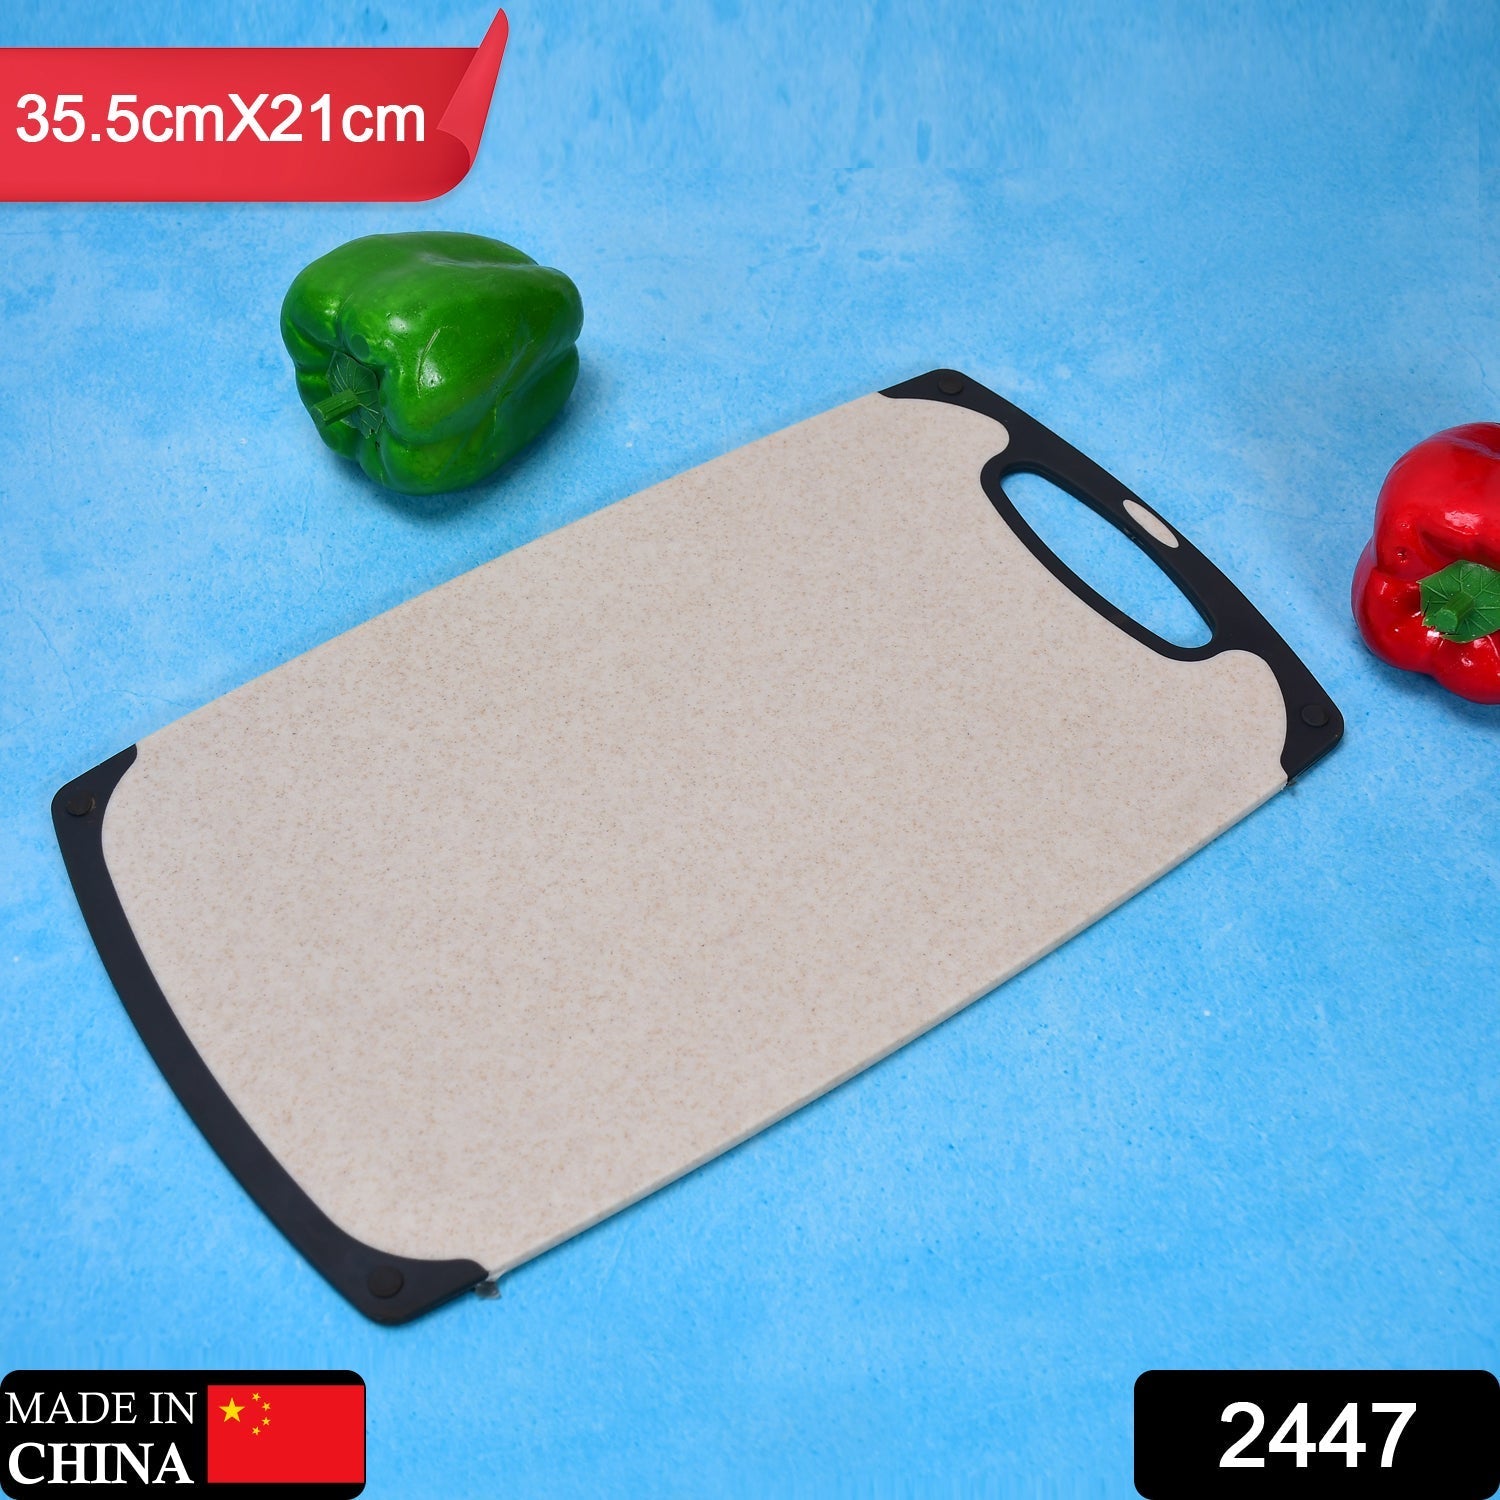 2447 Vegetables and Fruits Cutting Chopping Board Plastic Chopper Cutter Board Non-slip Antibacterial Surface with Extra Thickness 